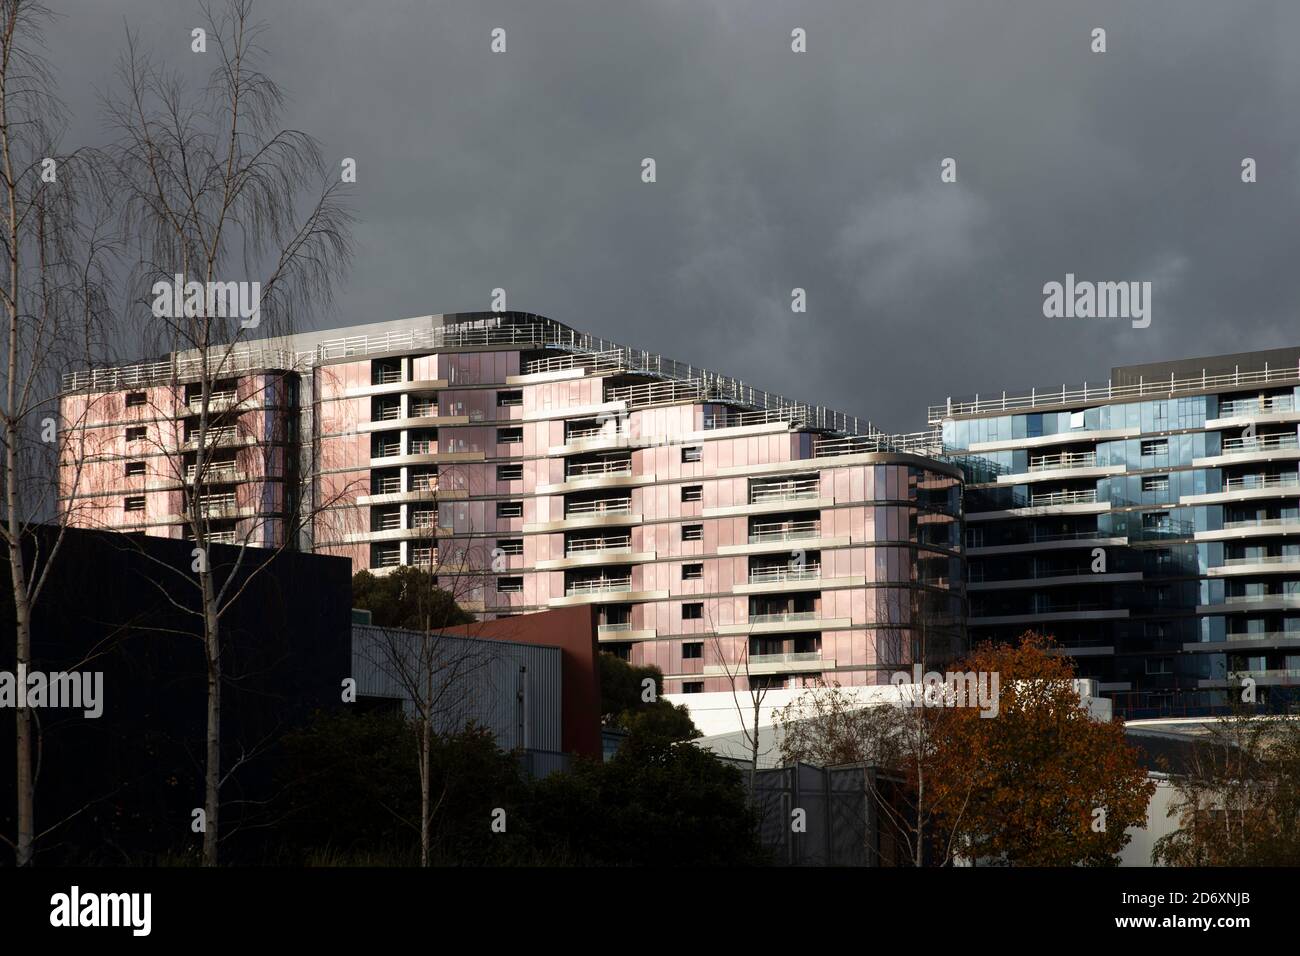 Glen waverley apartments with ominous cloudscape. Stock Photo